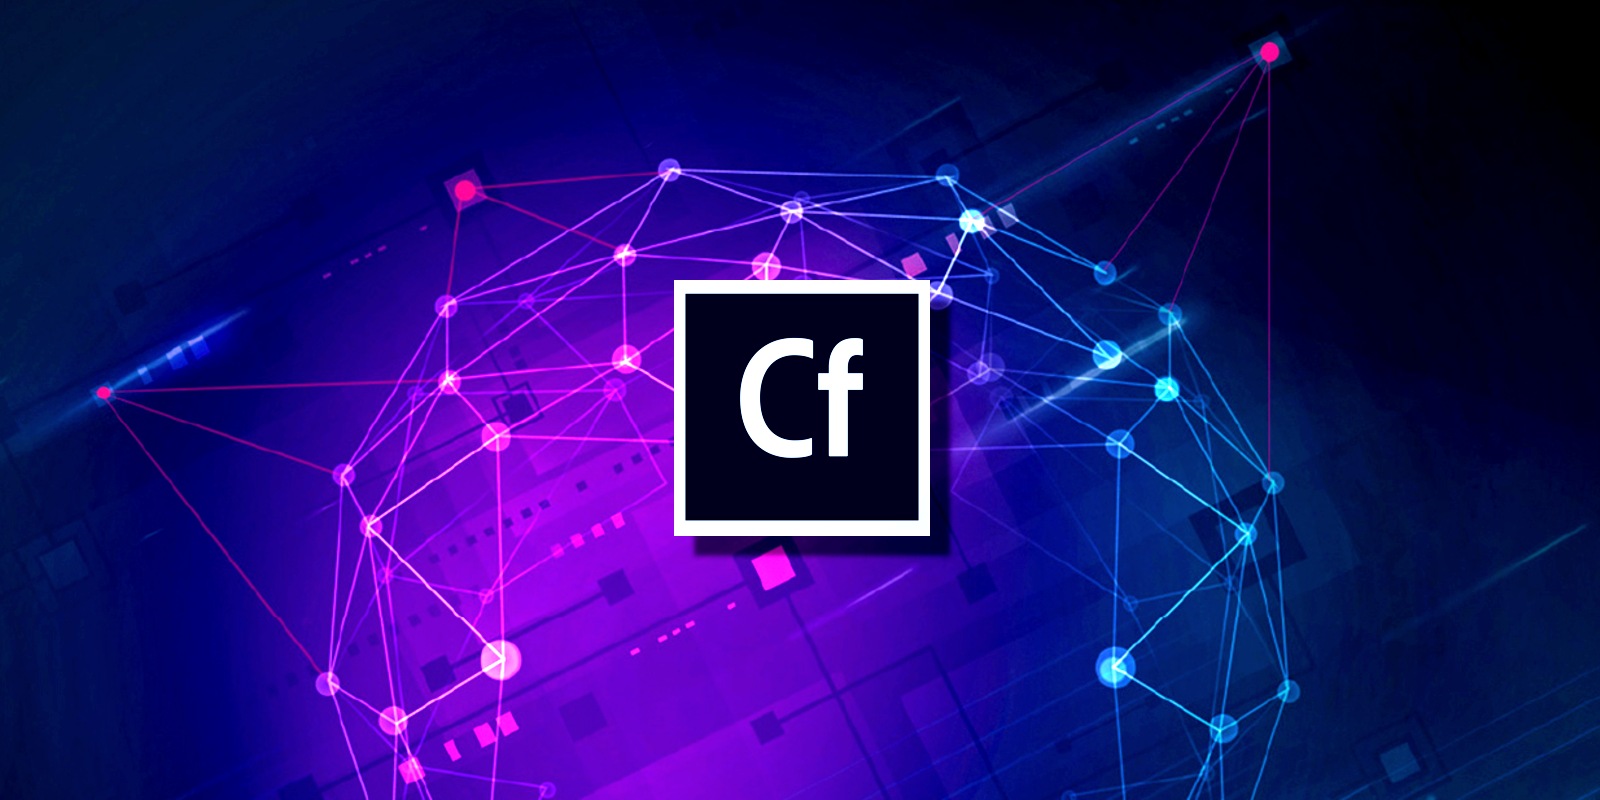 CISA has added a critical vulnerability impacting Adobe ColdFusion versions 2021 and 2018 to its catalog of security bugs exploited in the wild. This 